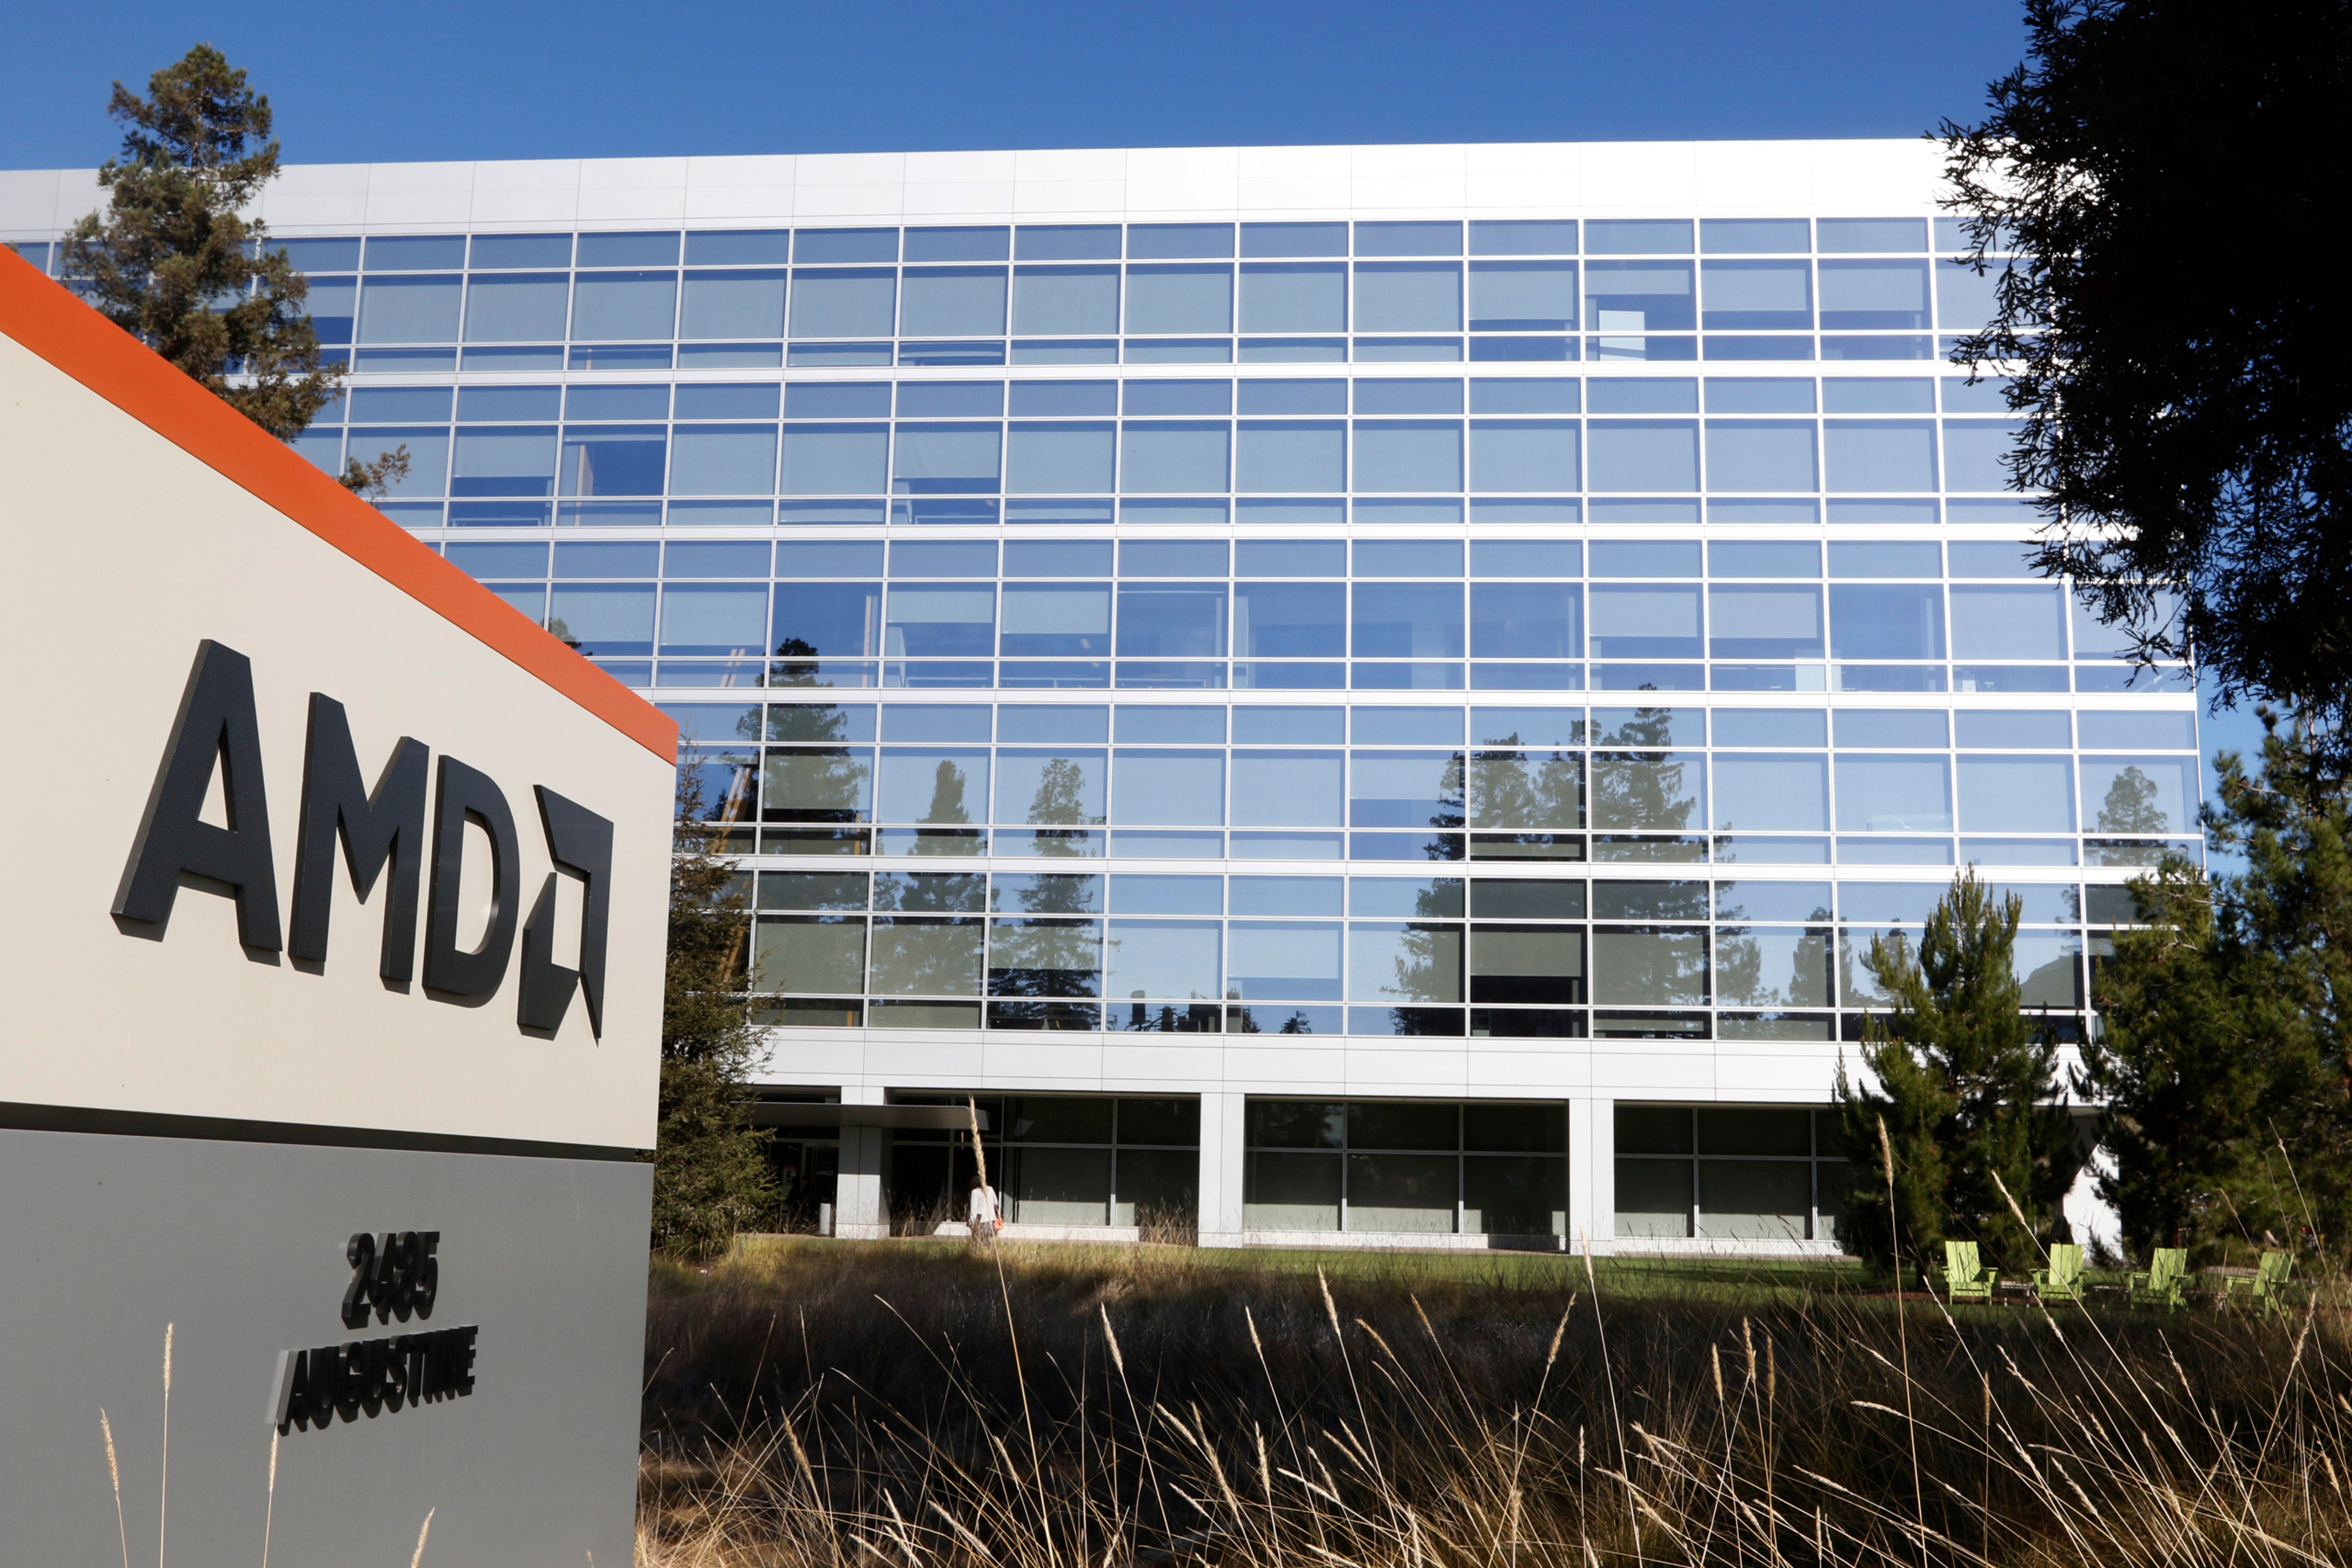 6 Advanced Micro Devices Analysts React To Earnings Beat, Guidance Miss, Market Share Gains